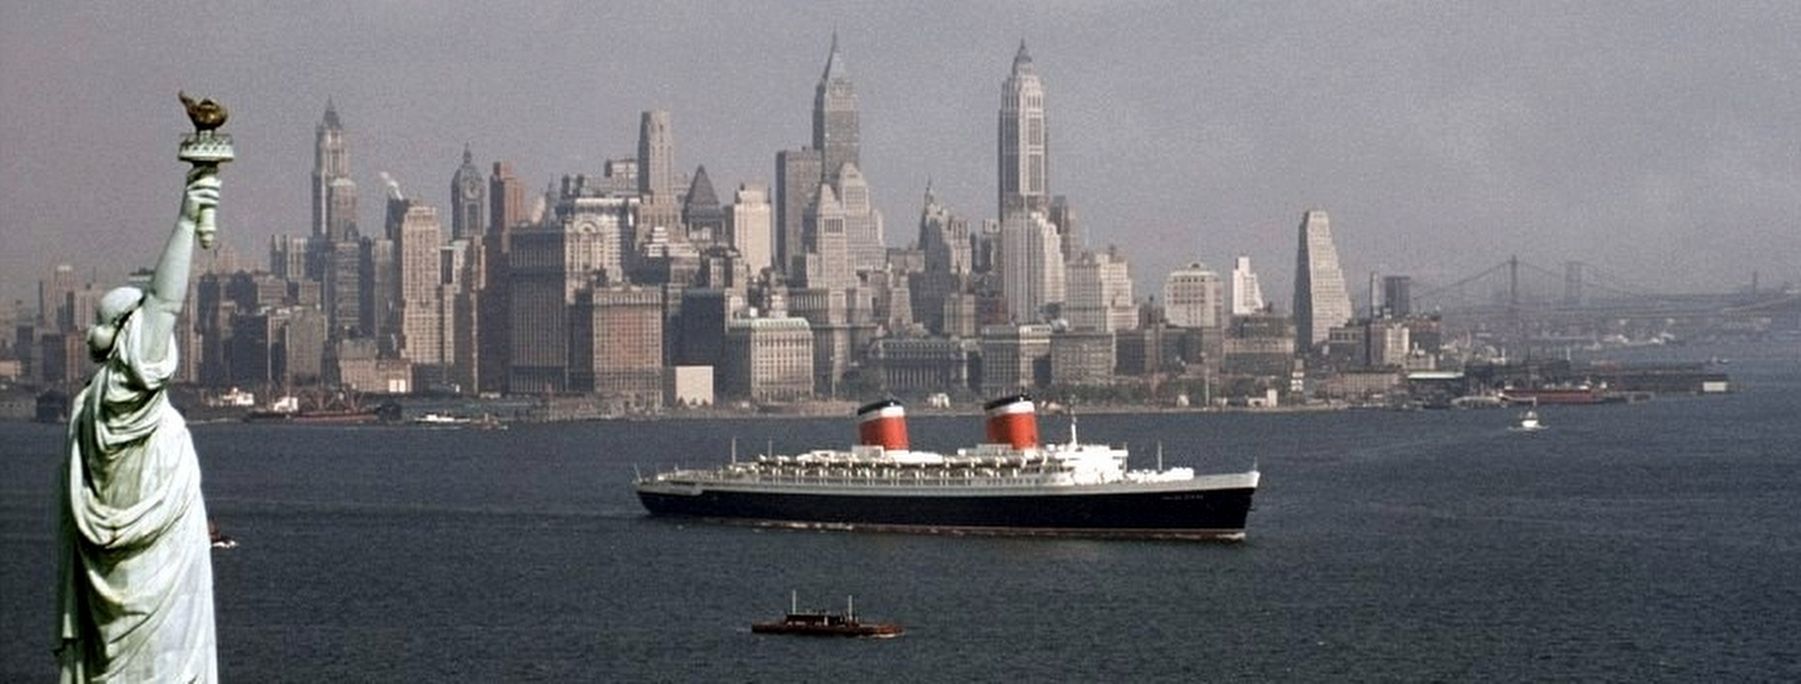 SS United States in New York Harbor, 1954. image. Click for full size.